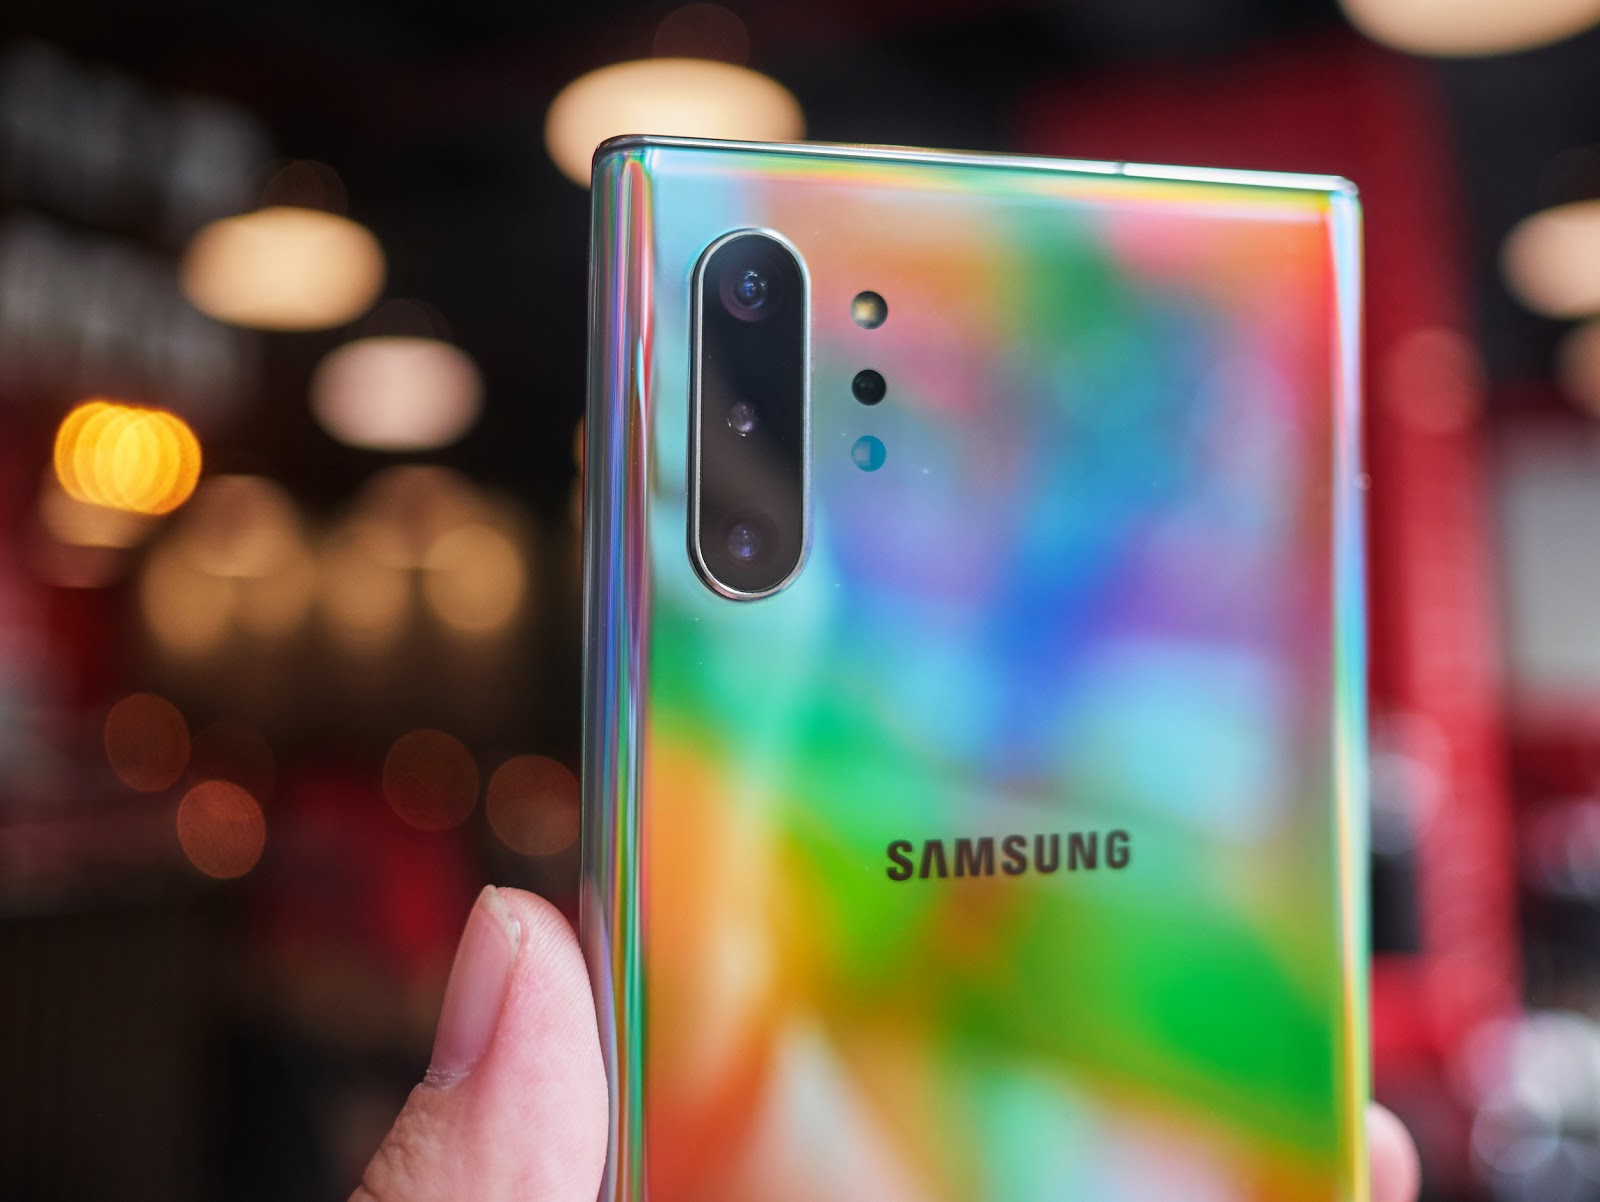 Samsung Galaxy Note 10 vs. Note 10 Plus: Which One Should You Buy?